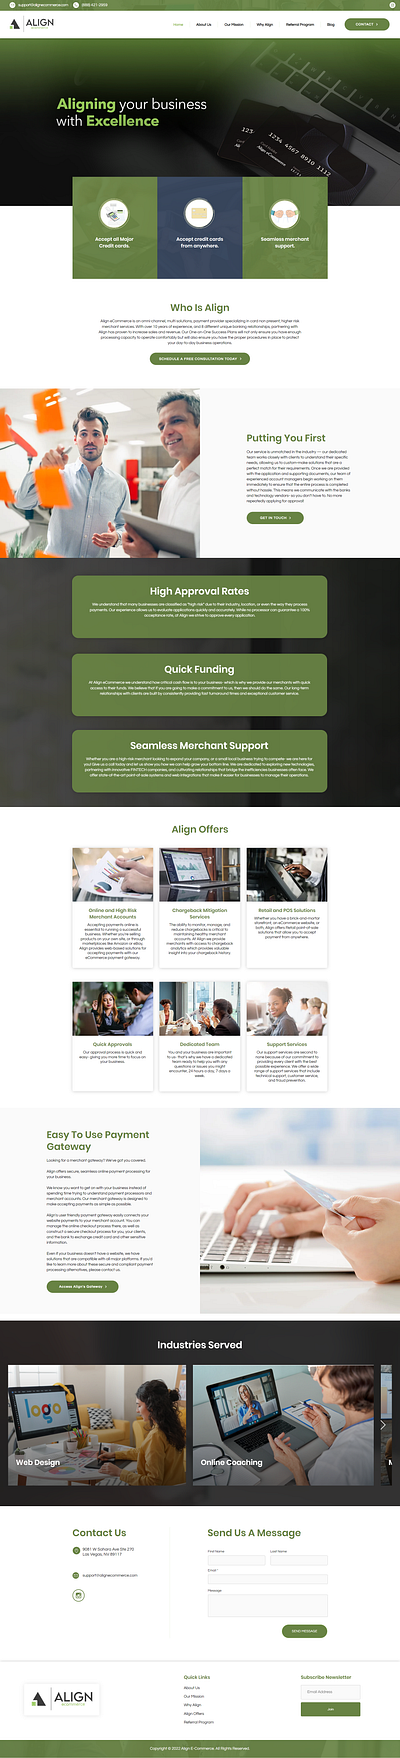 Service website made by wix commerce service ui user experience user interface ux website wix wix landing page